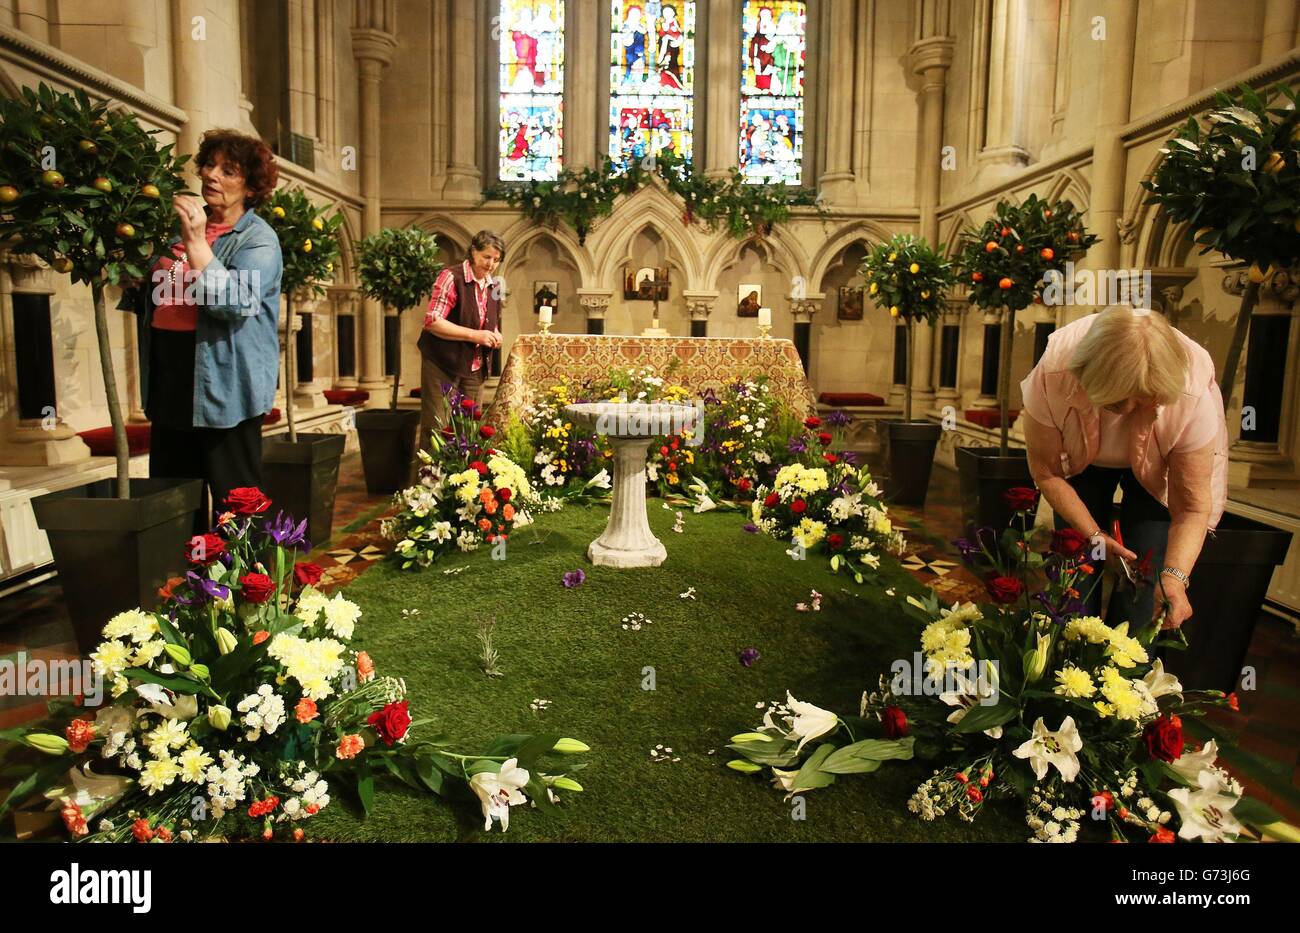 Members of the Friends of Christ Church Cathedral (left to right) Beatrice Stewart, Helen Purser, and Ruth Stewart, make final preparations ahead of The Dublin Garden Festival which takes place at the Cathedral. Stock Photo